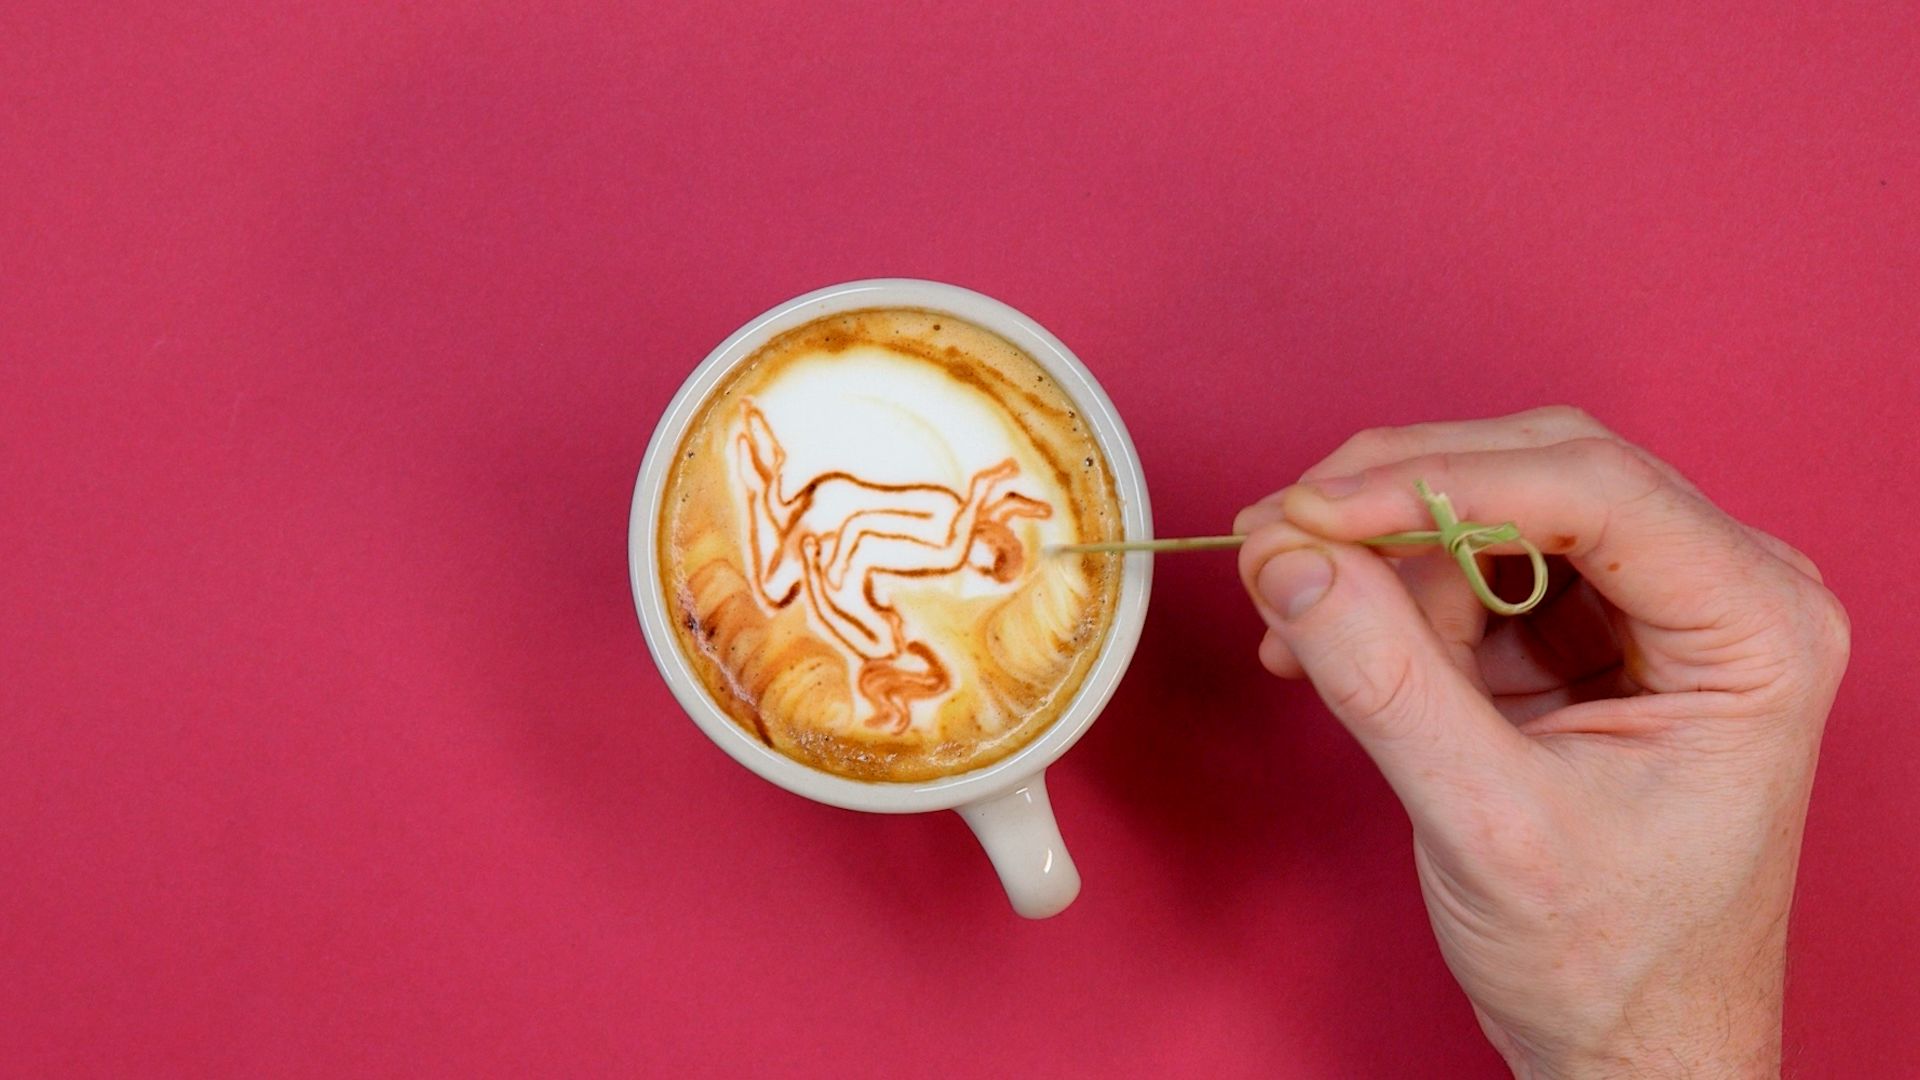 Watch The 7 Best Postions for Women to Achieve Orgasm, Illustrated in Latte  Art | Glamour